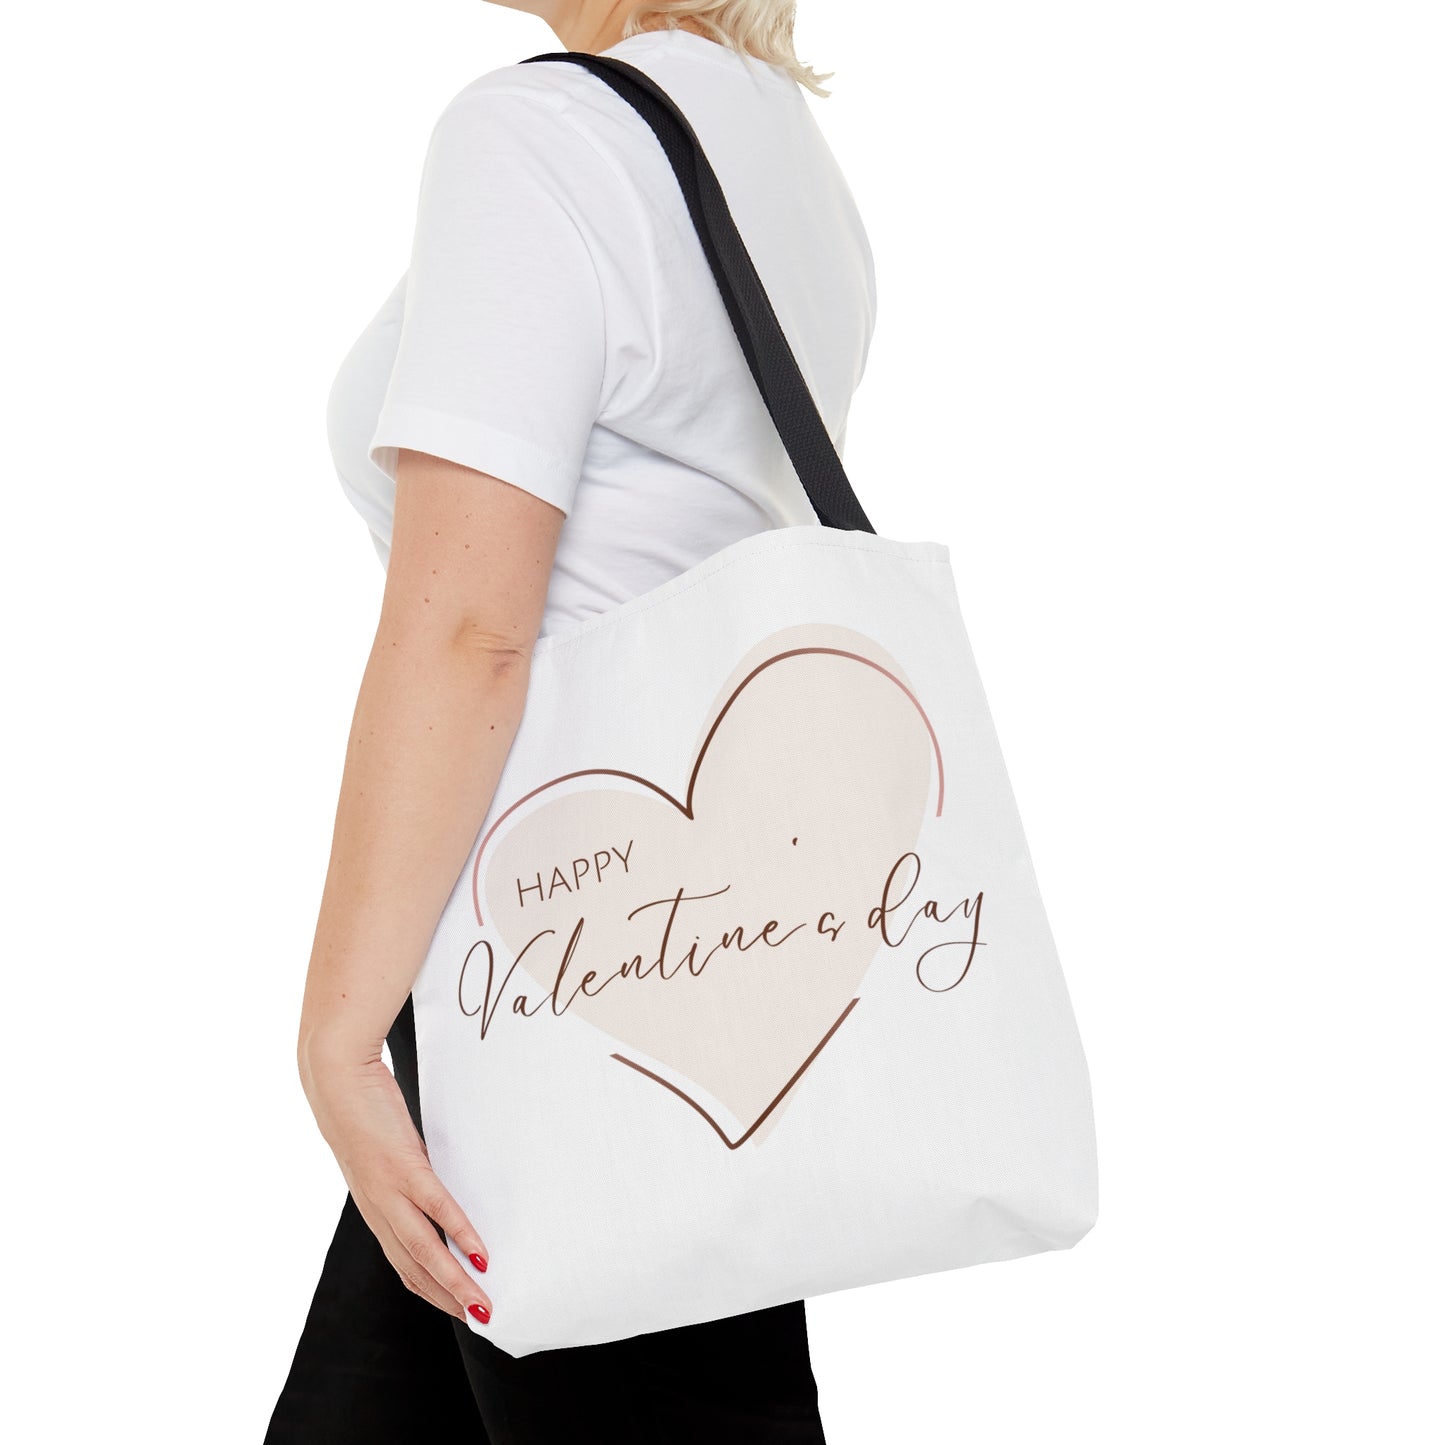 Happy Valentine's Day inside Heart Printed Tote Bag, Reusable Tote Bag for Valentine